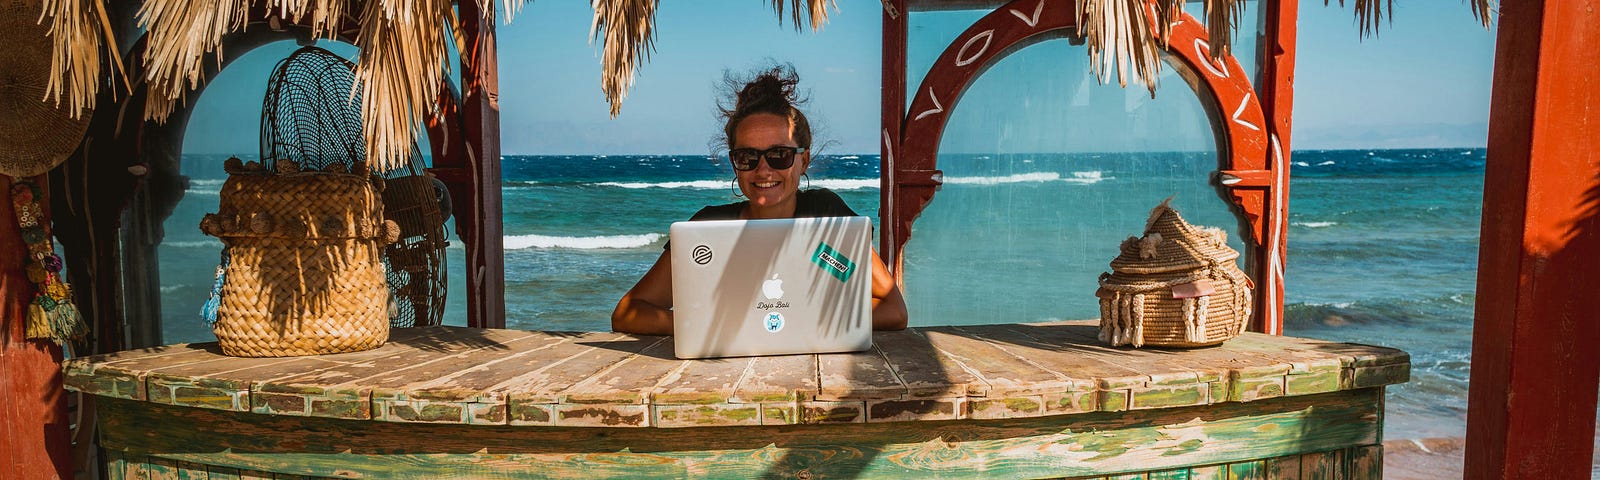 Digital Nomad (Remote worker) sitting in tropical hut with a beach and ocean in the backdrop.